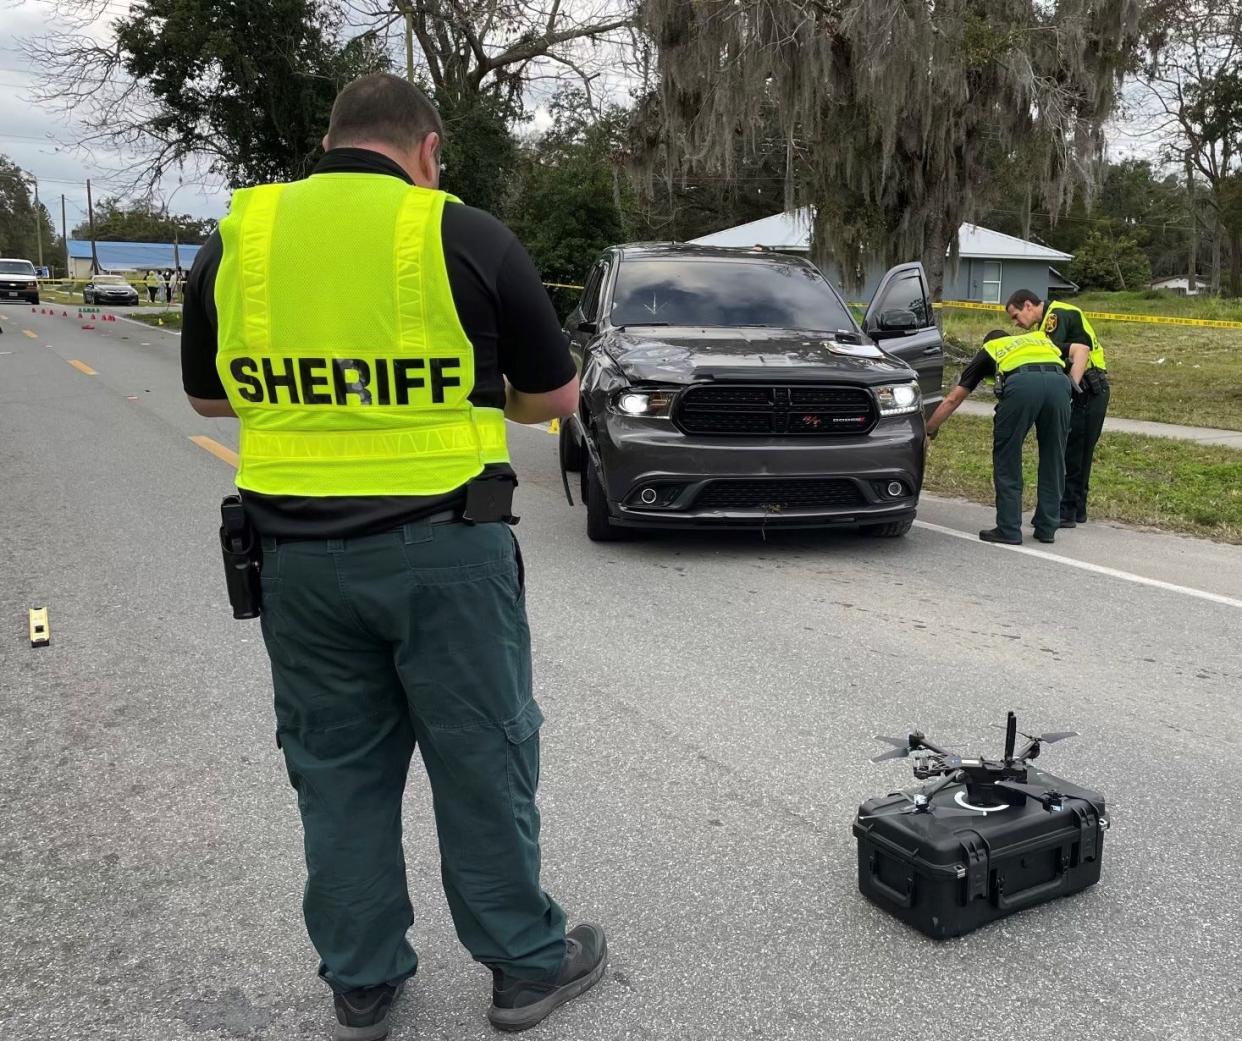 Polk County Sheriff's Office is investigating a crash that killed 15-year-old Yeriel Gonzalez, an Auburndale High School student, on Tuesday morning 34th Street Northwest near Avenue S.